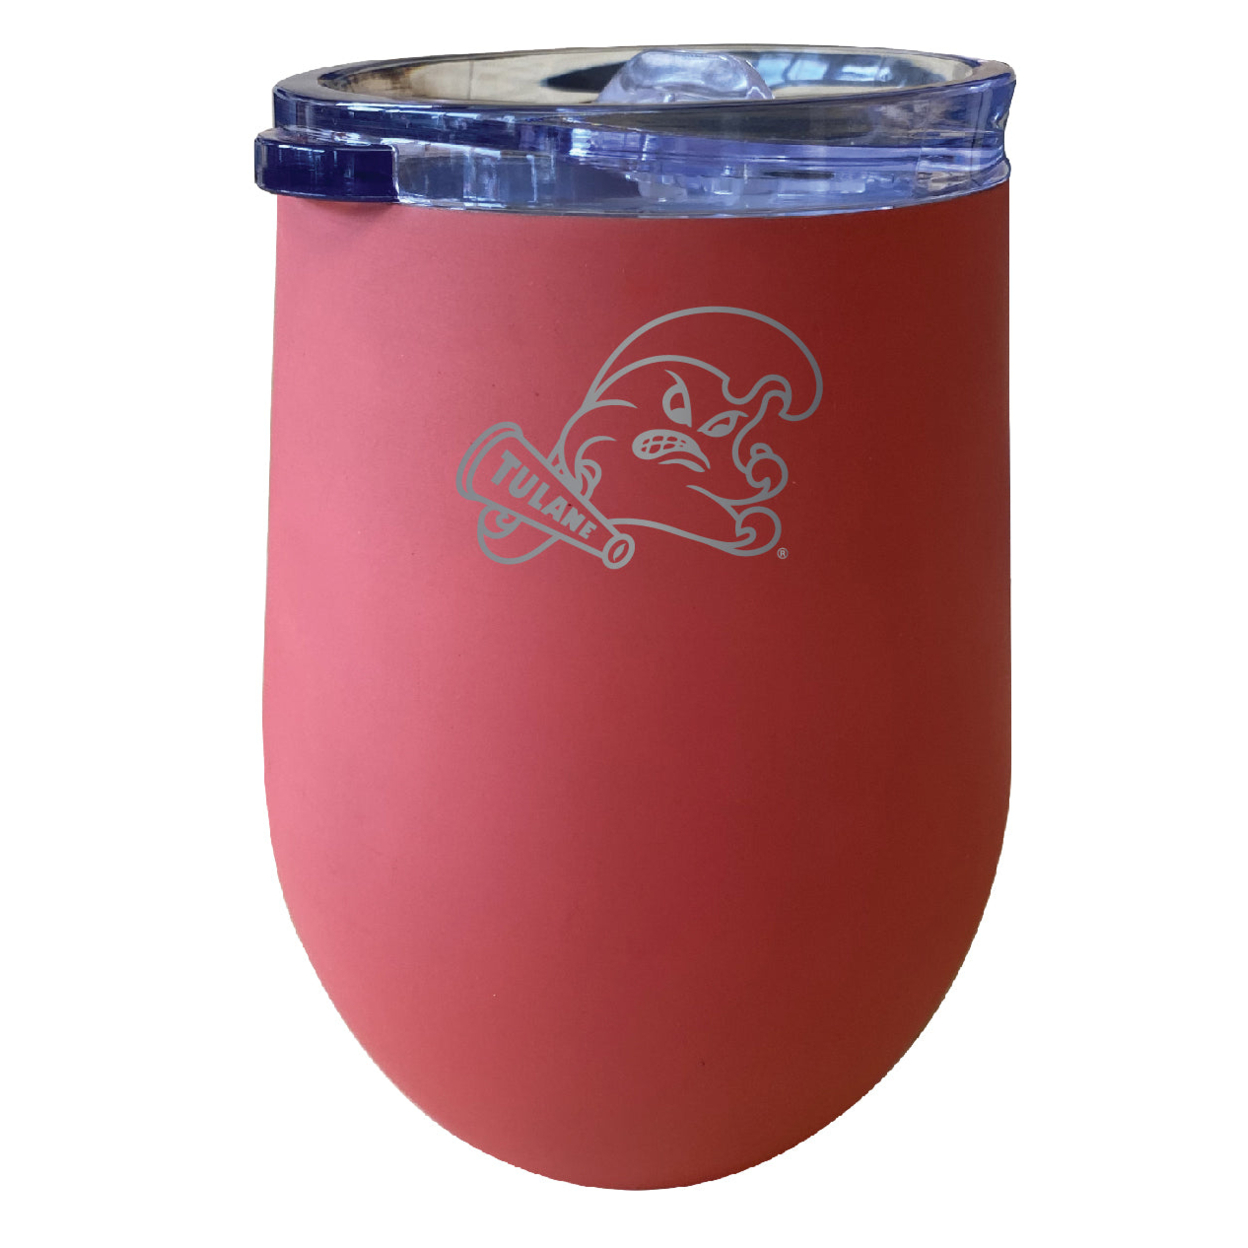 Tulane University Green Wave 12 Oz Etched Insulated Wine Stainless Steel Tumbler - Choose Your Color - Coral